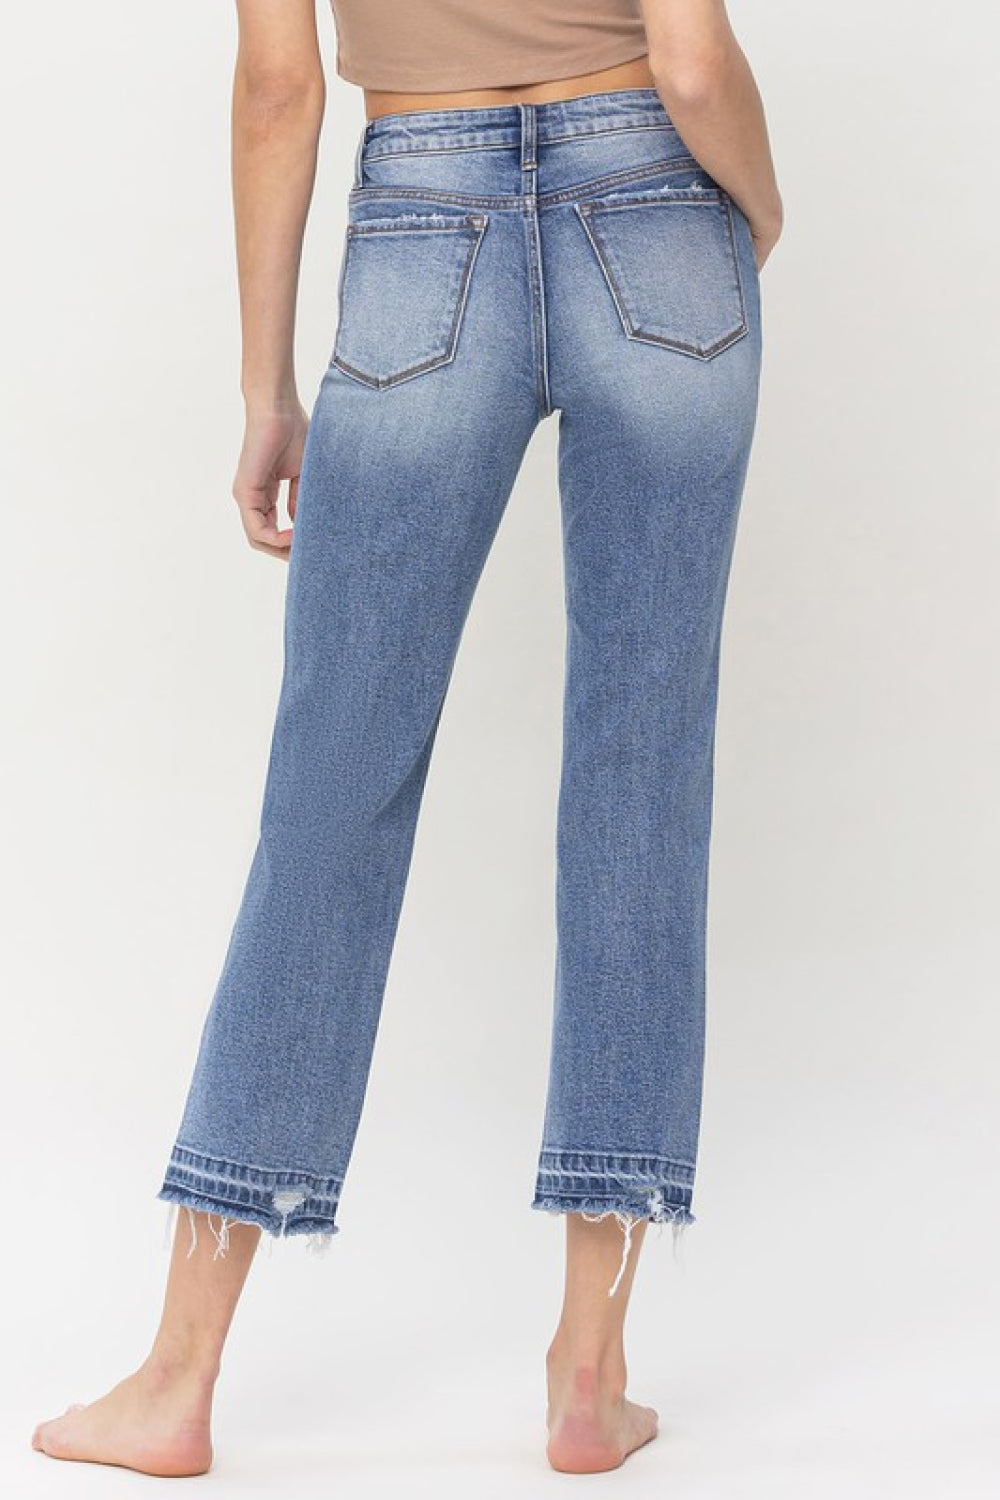 Lovervet Full Size Lena High Rise Crop Straight Jeans - Jeans - FITGGINS